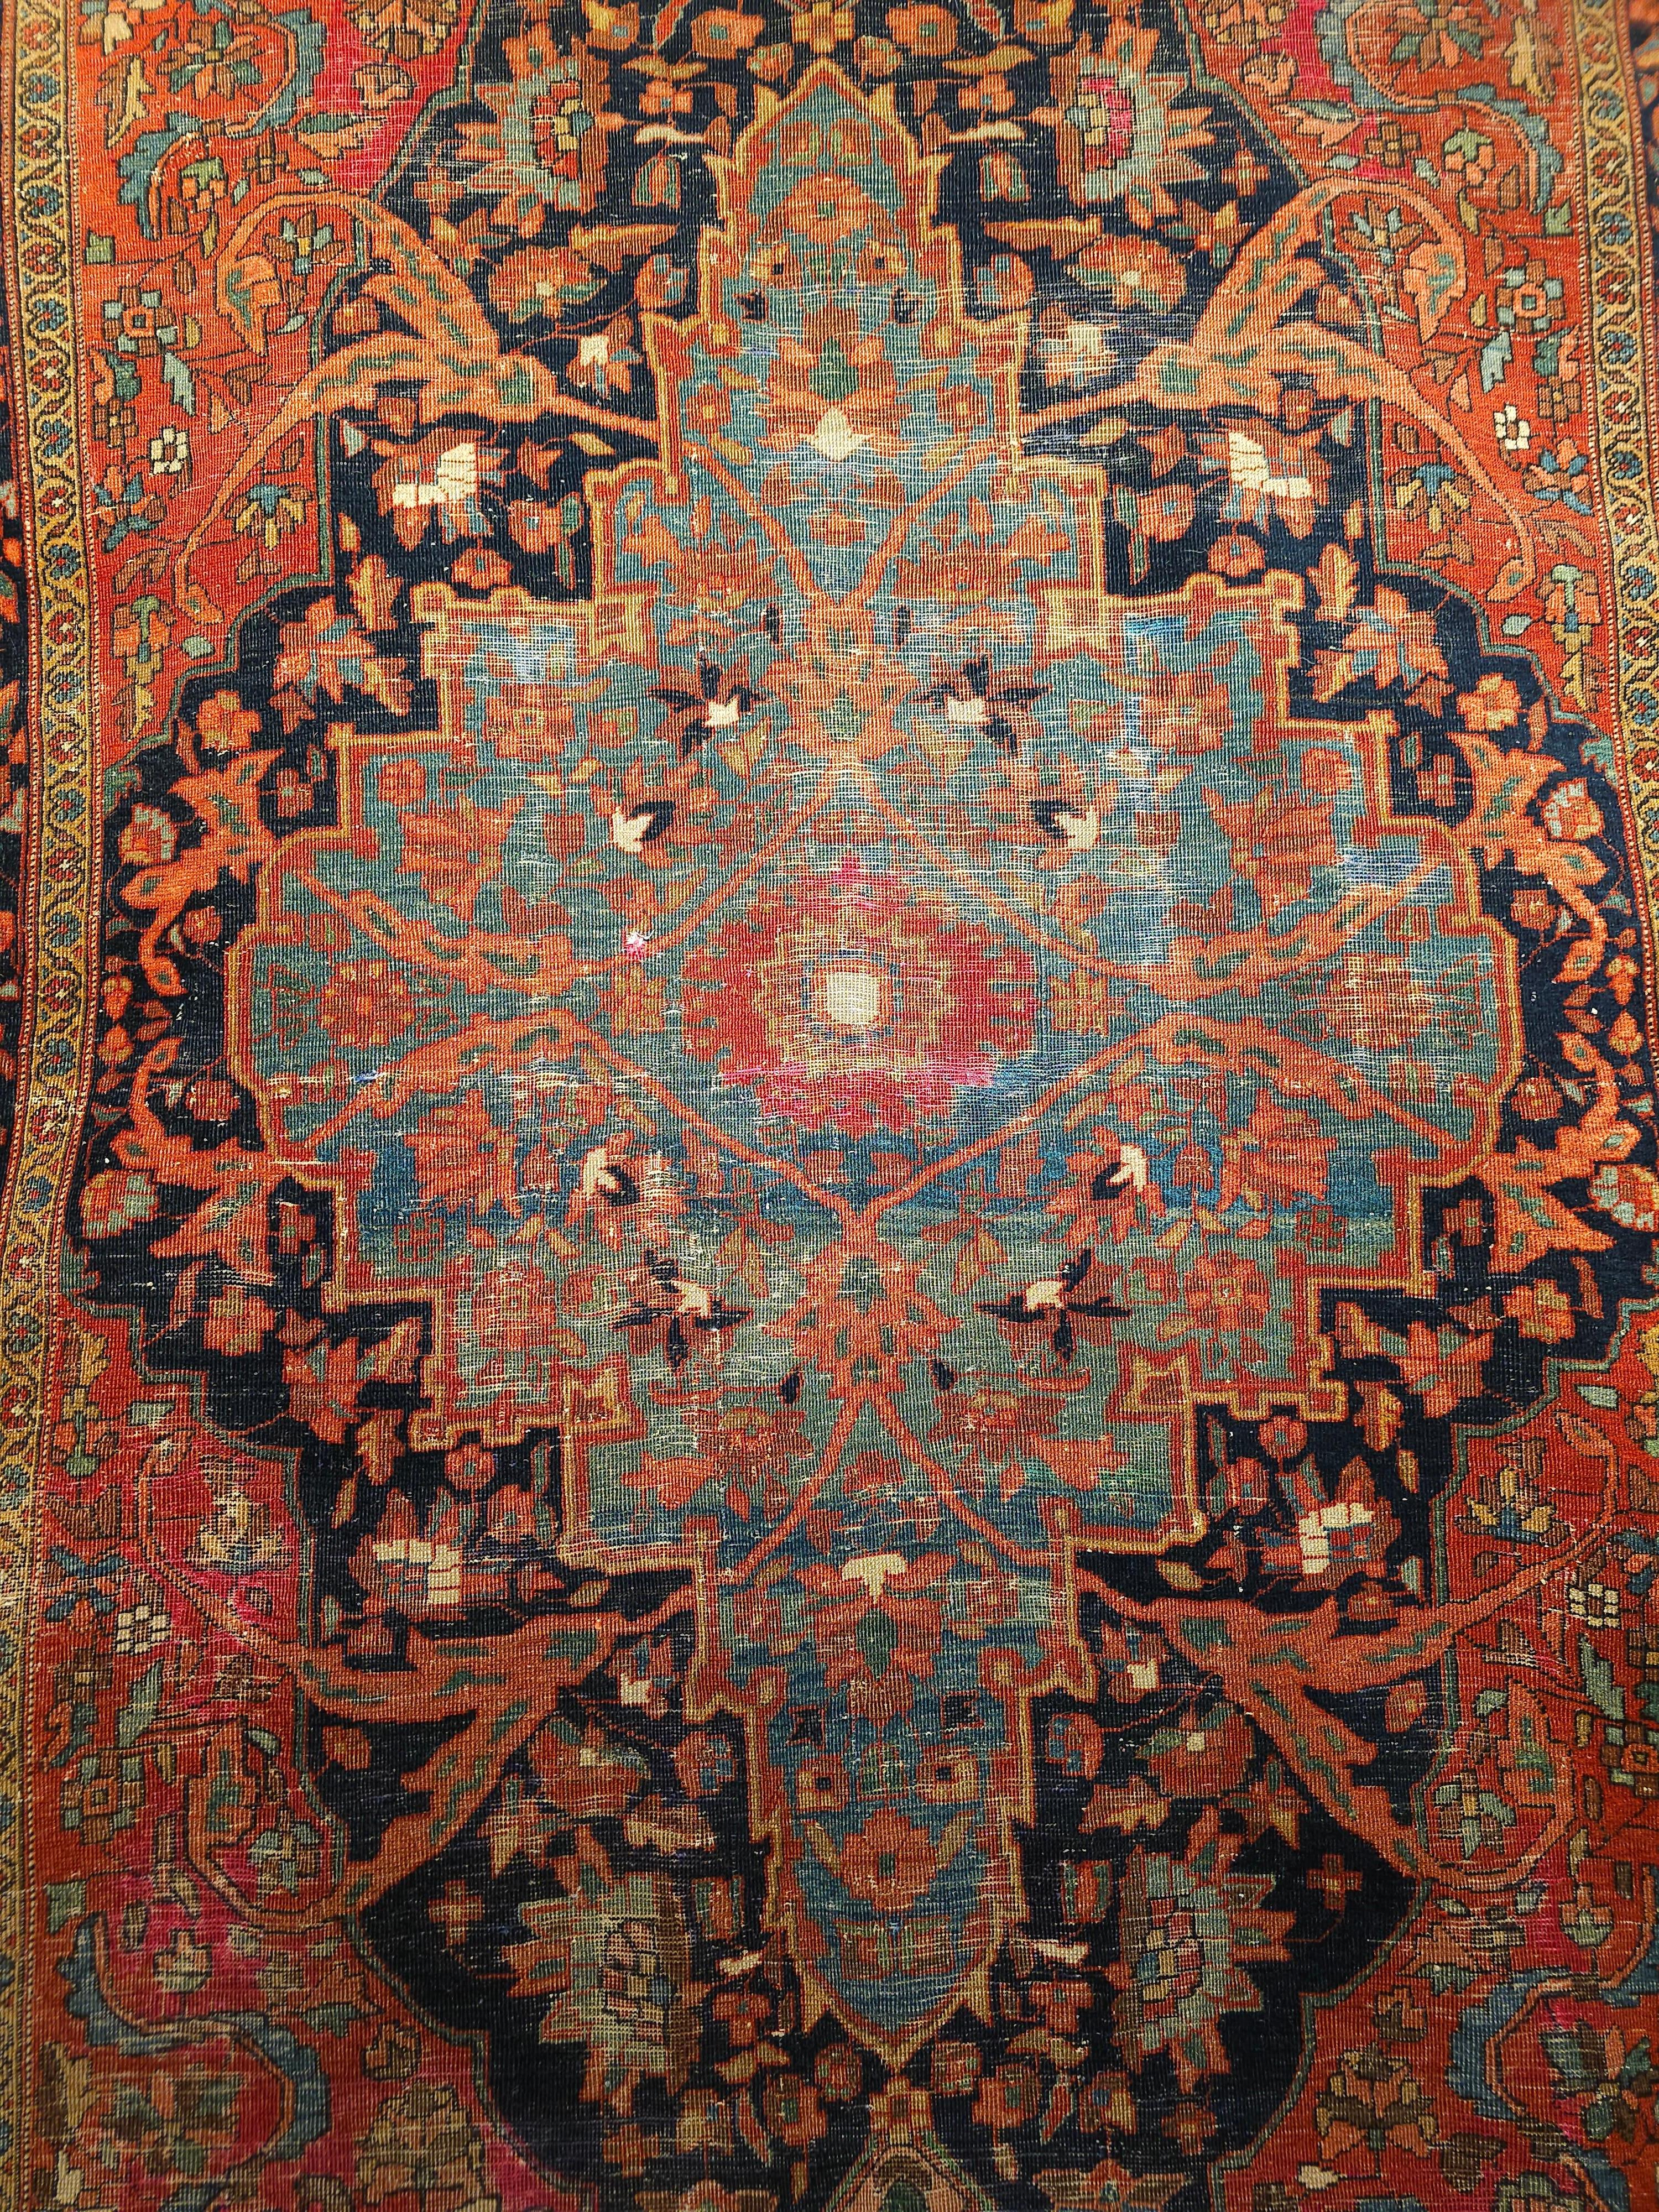 Vintage Persian Farahan with a Botanical Design in Abrash Pale Blue/Green, Navy Blue, and Red. One of the most beautiful Persian Farahan area rugs in our collection. Astonishingly beautiful design and color combination. The central pale-blue